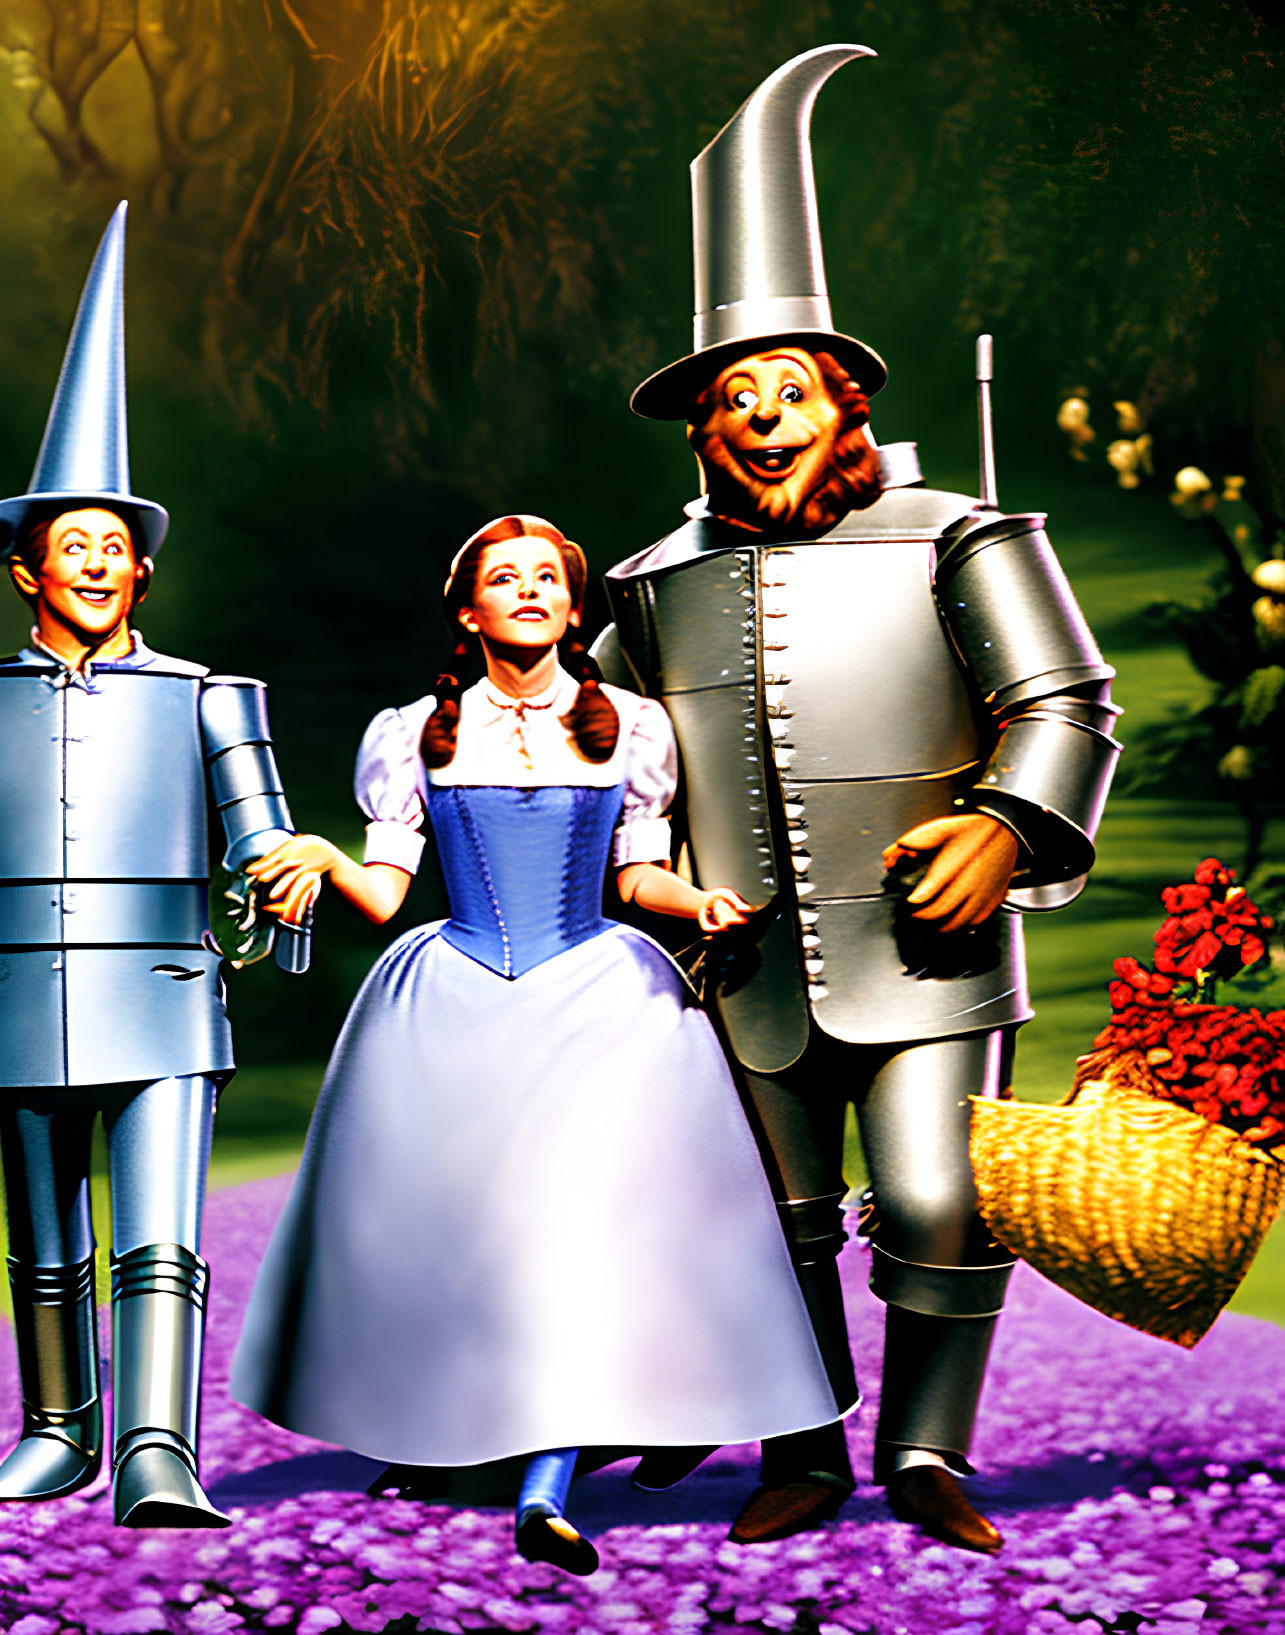 Fantastical illustration of Dorothy with Tin Man and Scarecrow on yellow brick road